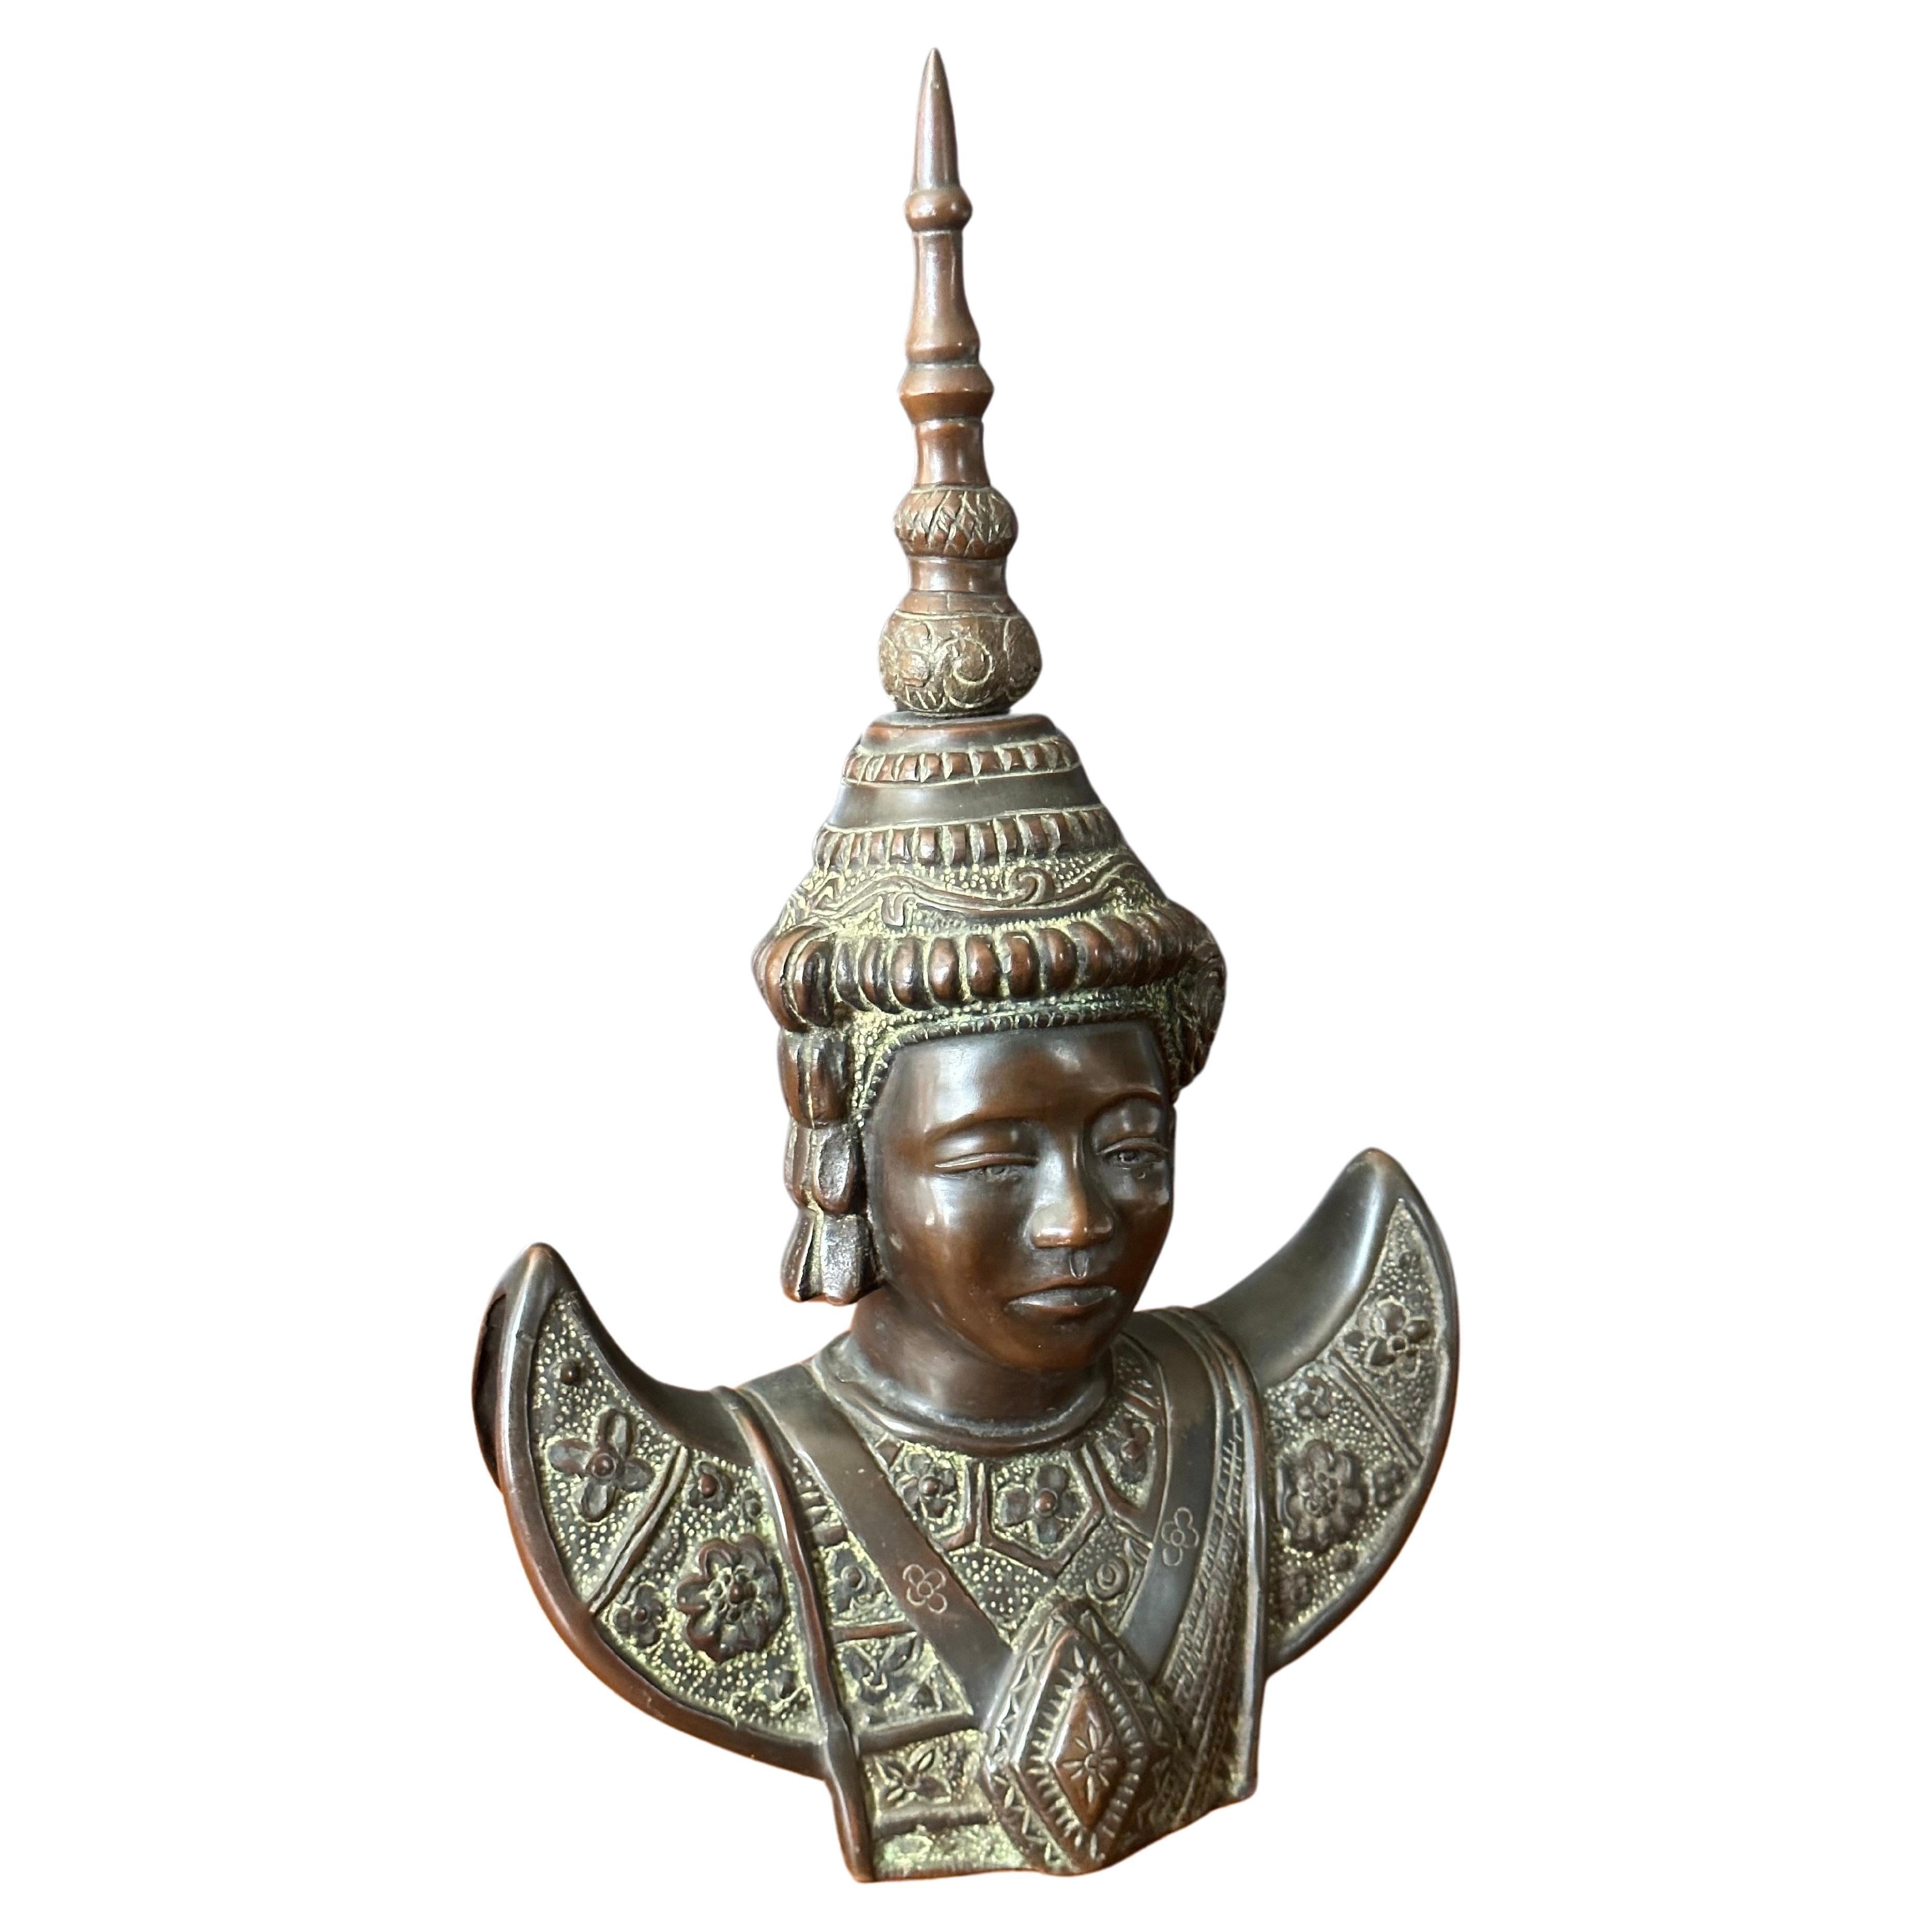 Vintage cast bronze Cambodian dancer sculpture, circa 1950s. The piece is in very food vintage condition with a rich patina with and measures 7.5